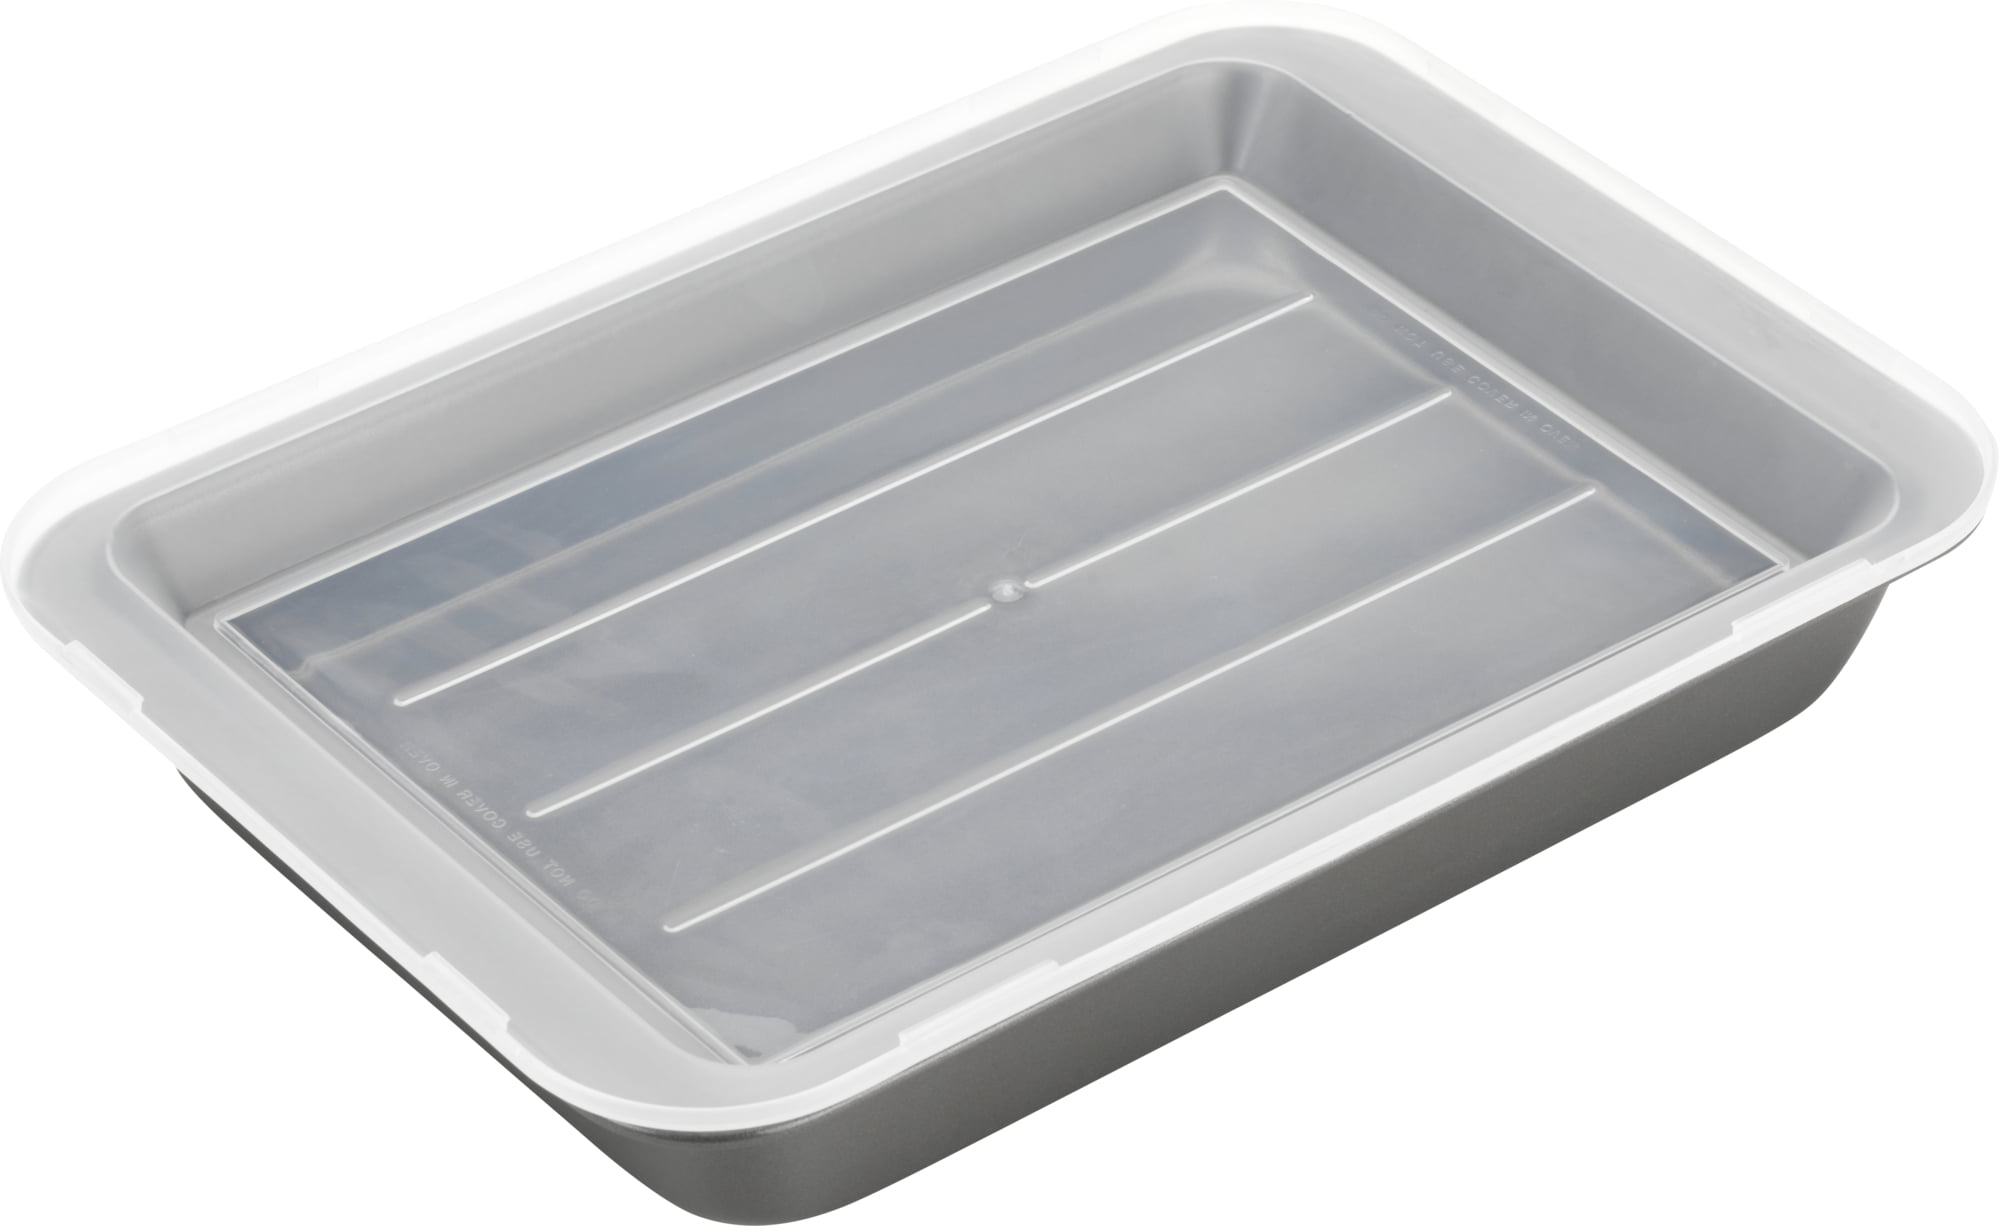 13 x 9 Rectangle Pan w/Lid and handle, Nonstick - GoodCook